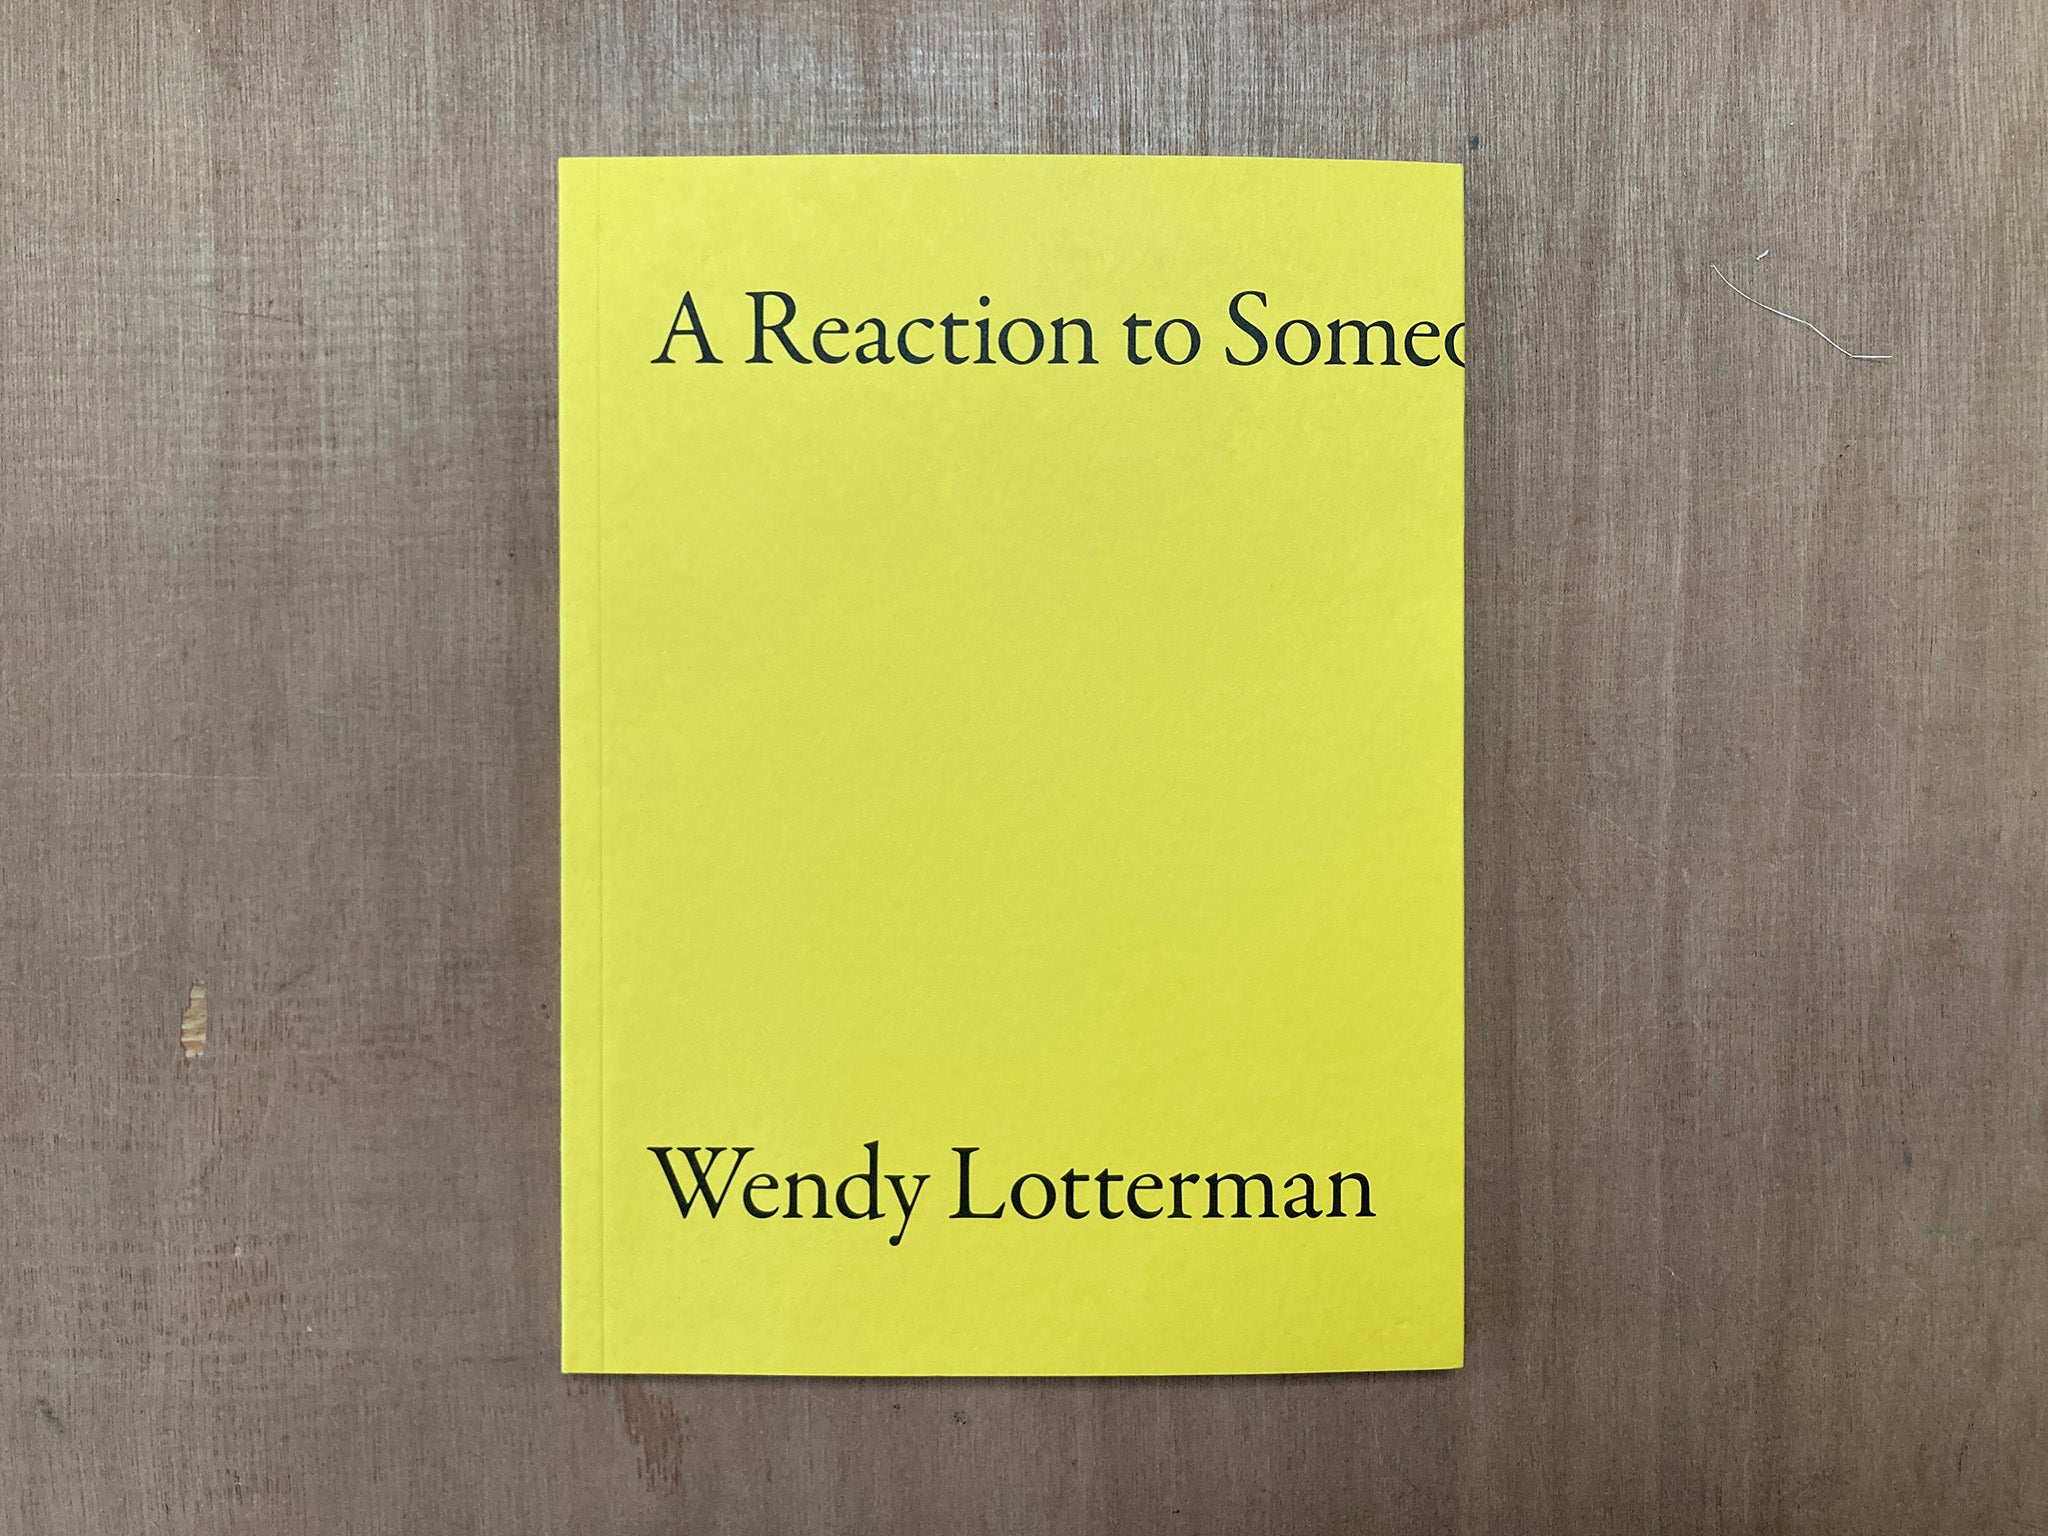 A REACTION TO SOMEONE COMING IN by Wendy Lotterman